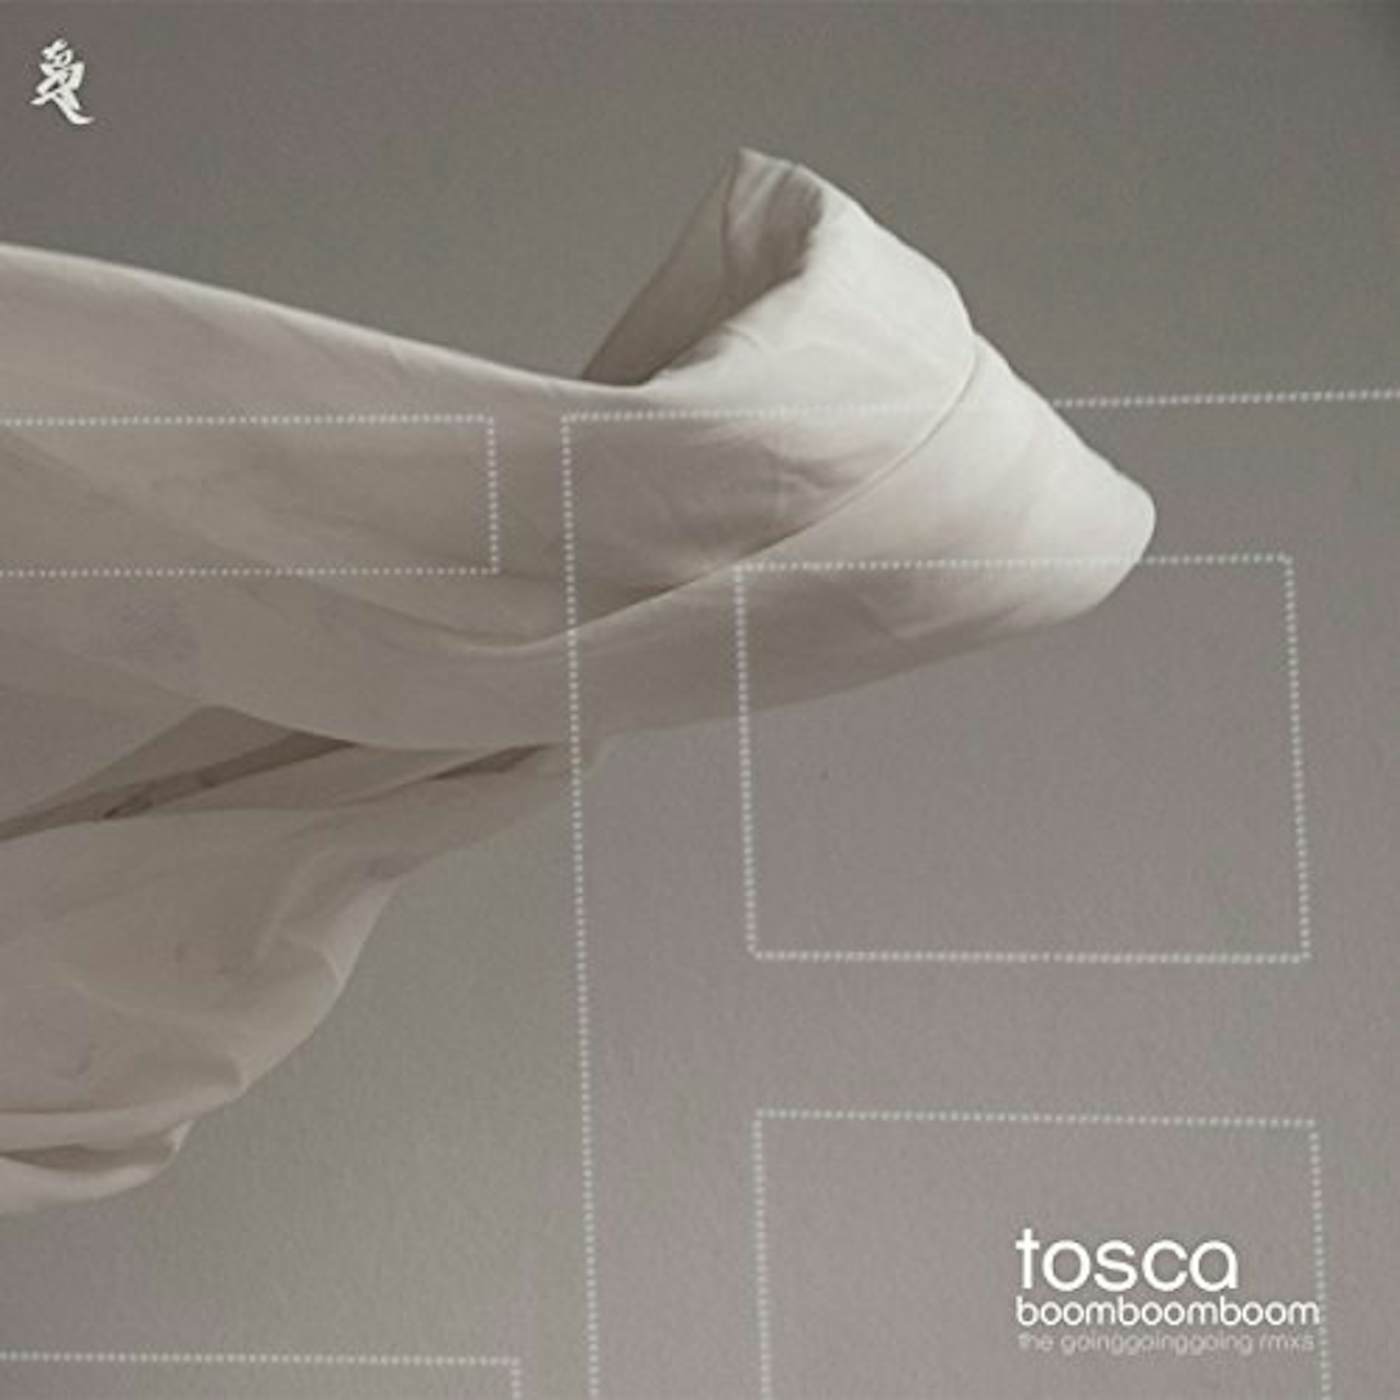 Tosca BOOM BOOM BOOM (THE GOING GOING GOING REMIXES) CD